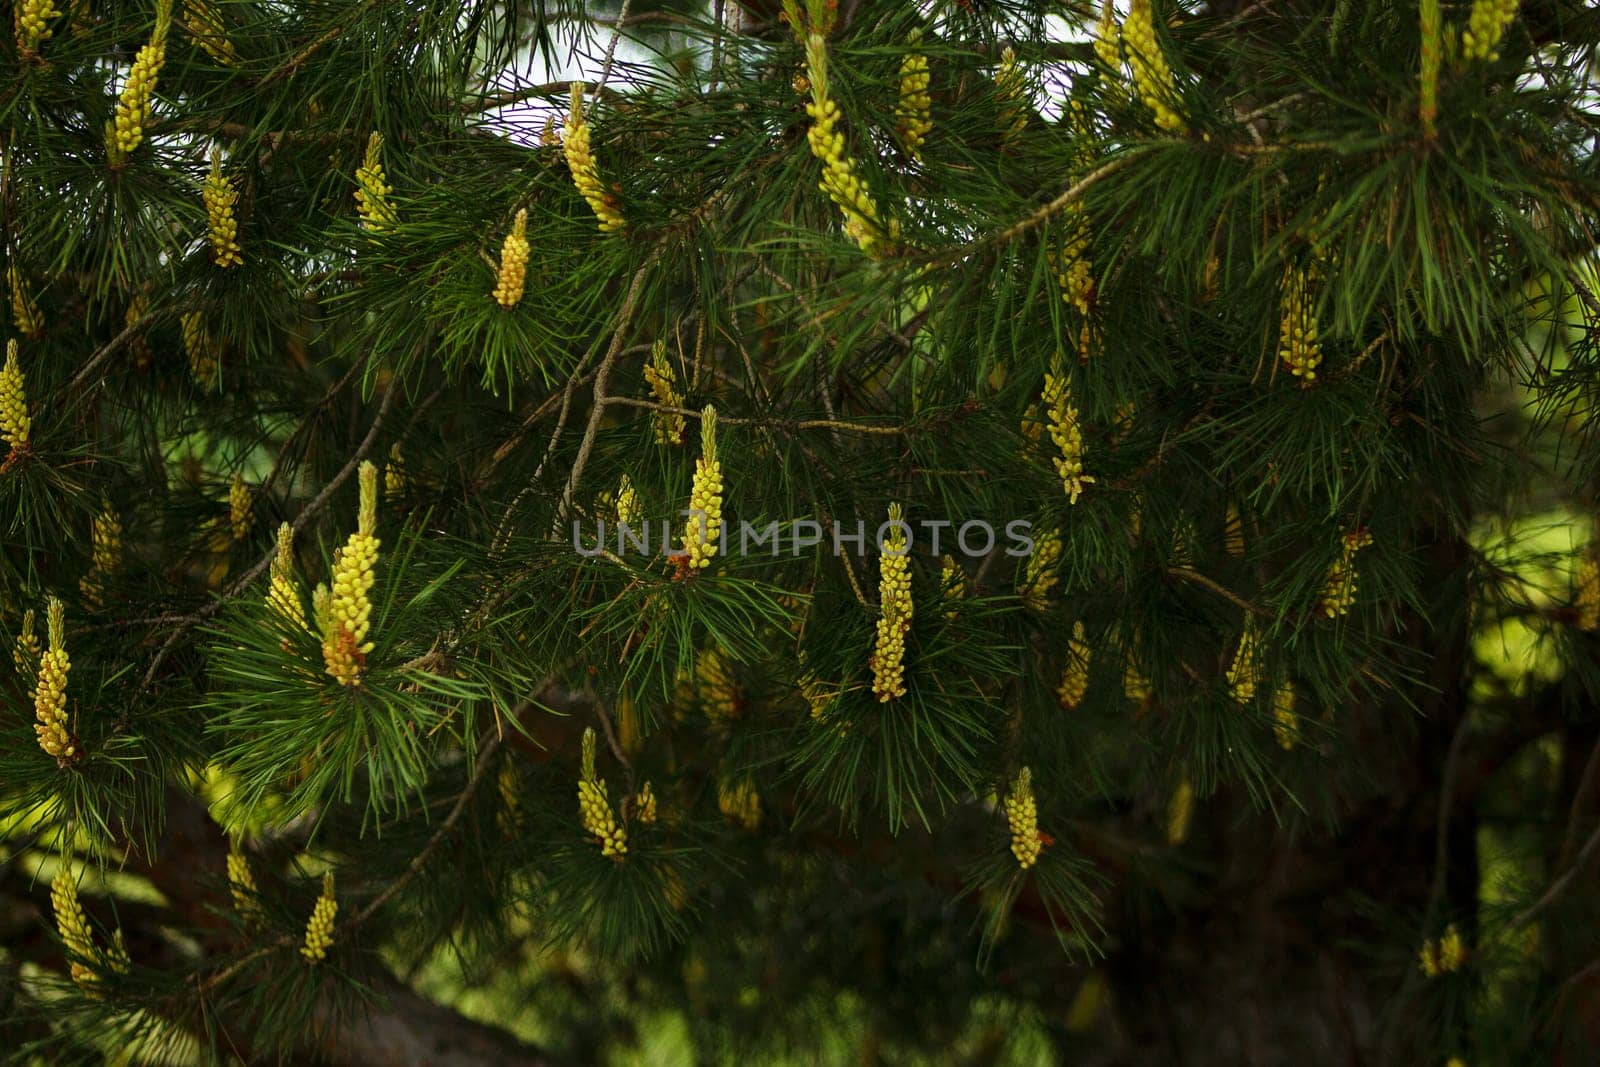 Pine flowers blooming in spring, outdoors in the forest. High quality photo